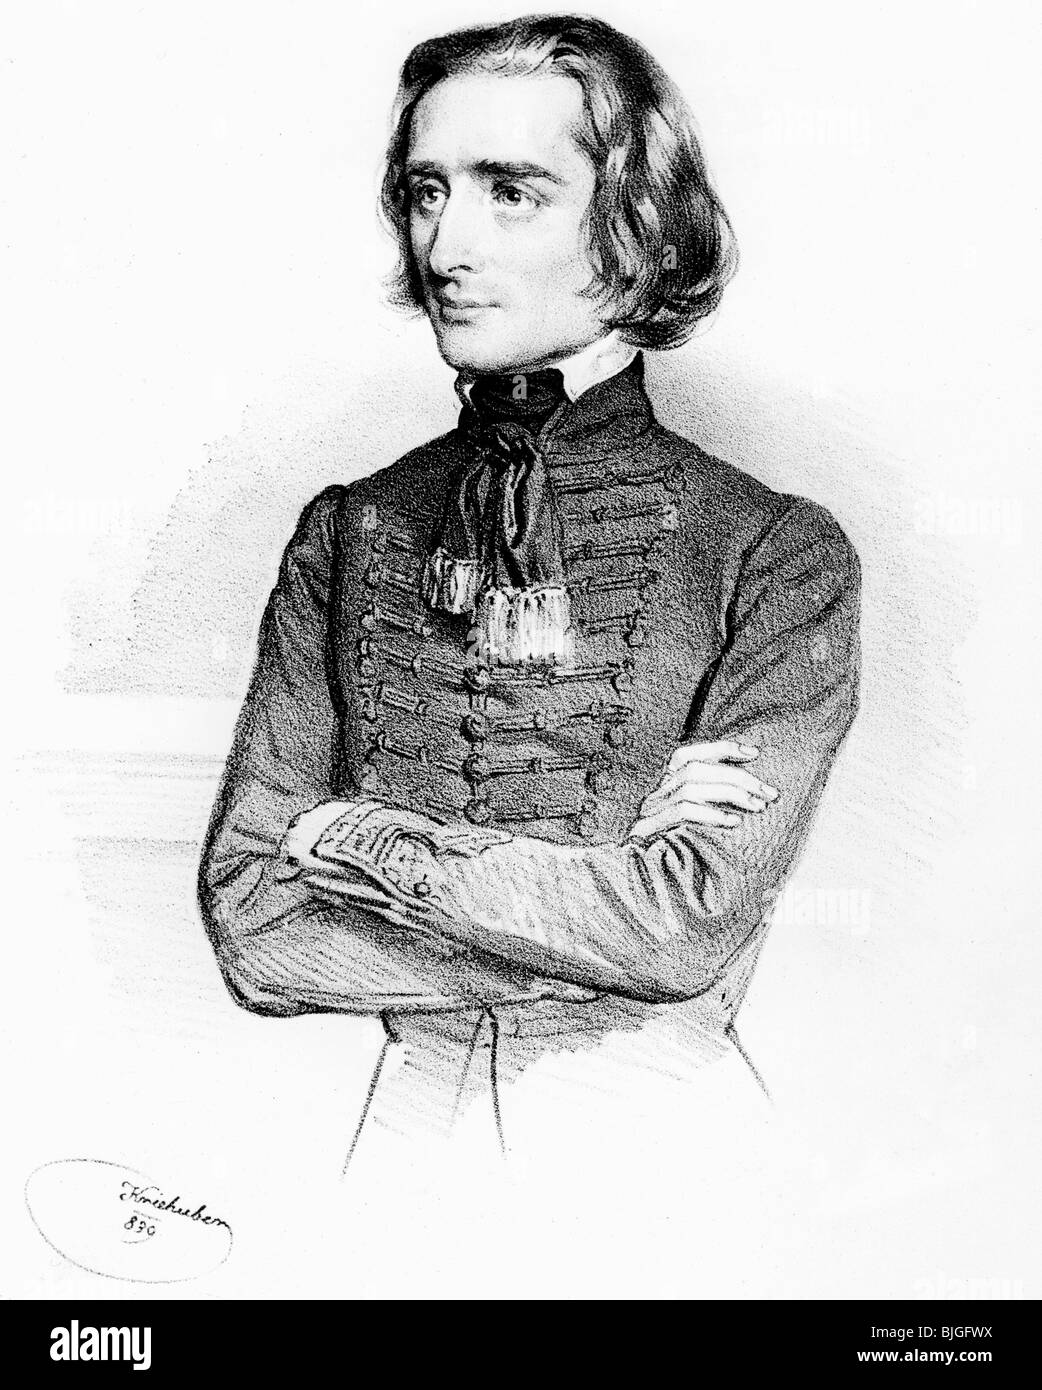 Liszt, Franz, 22.10.1811 - 31.7.1886, Hungarian composer and pianist, half length, lithograph by Joseph Kriehuber the Elder,1839, , Stock Photo